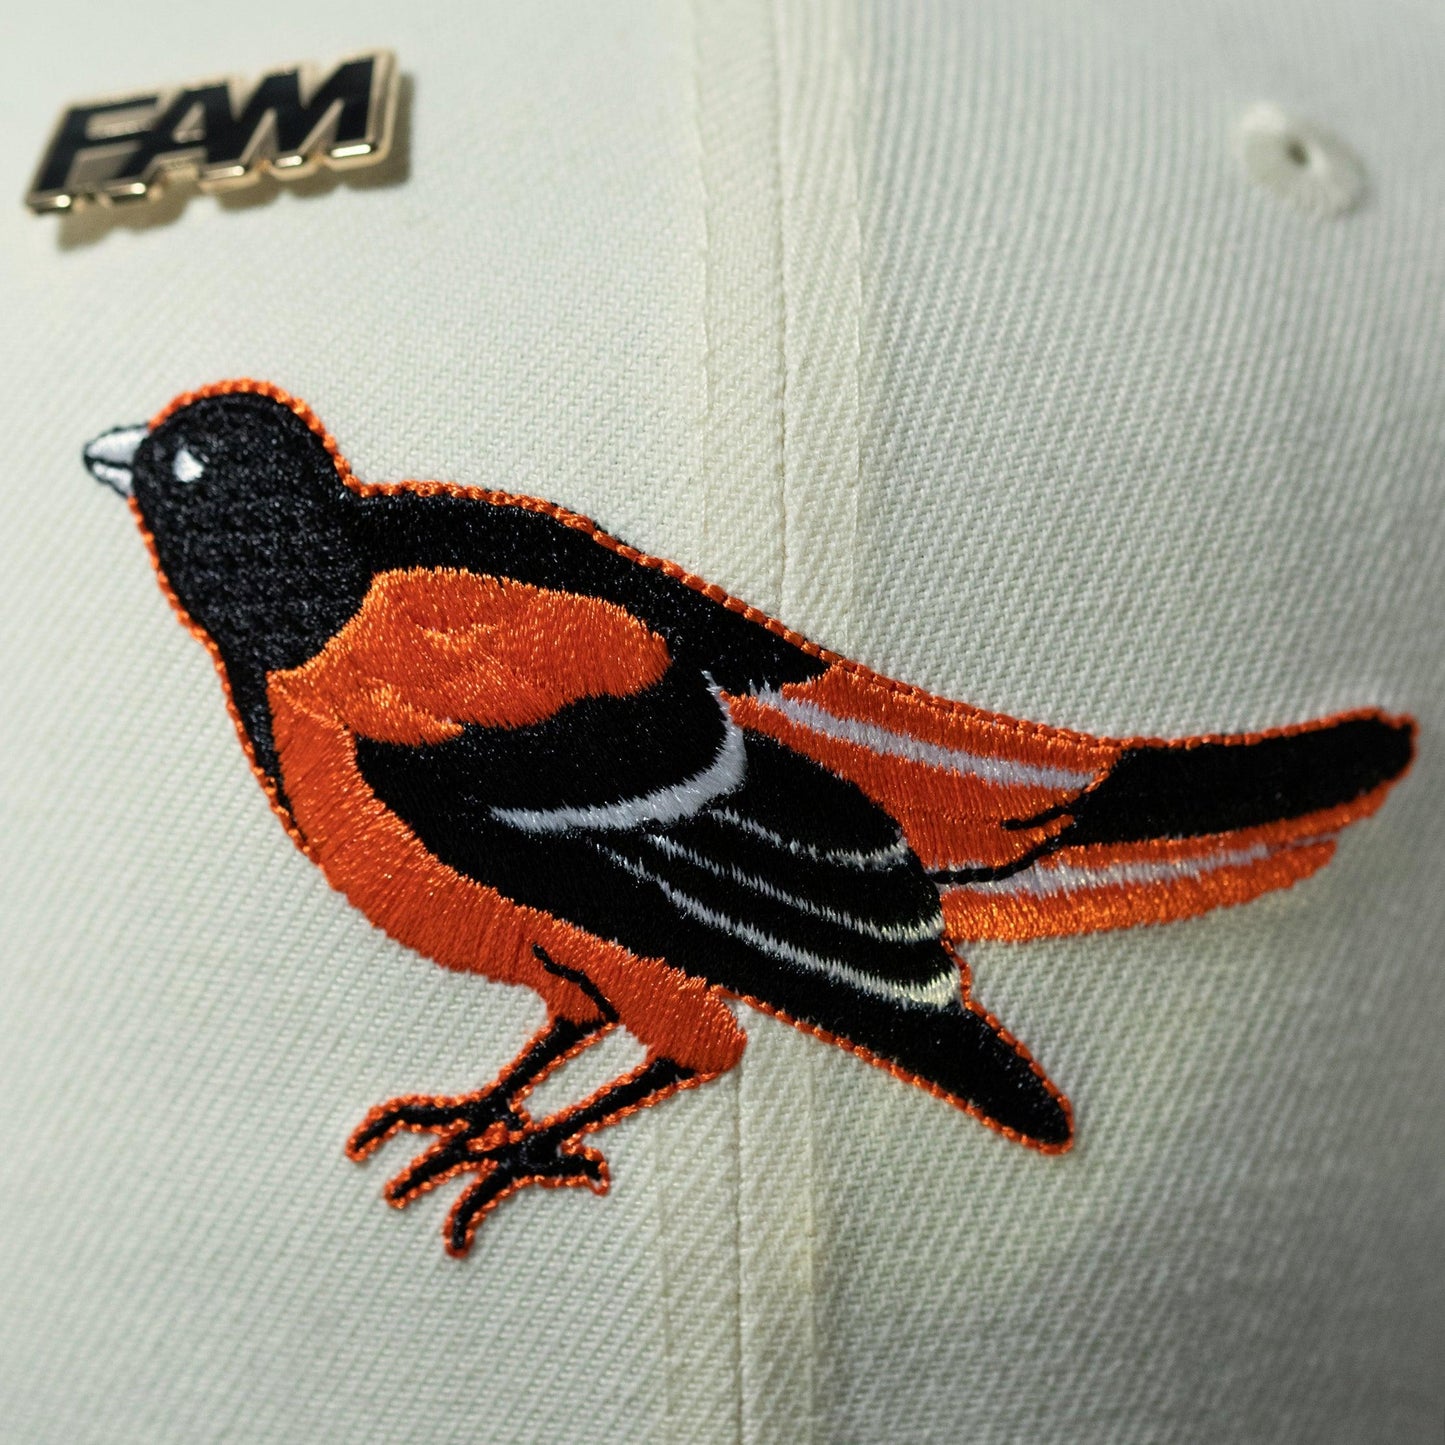 NEW ERA 59FIFTY MLB BALTIMORE ORIOLES ALL STAR GAME 1993 TWO TONE / ORANGE UV FITTED CAP